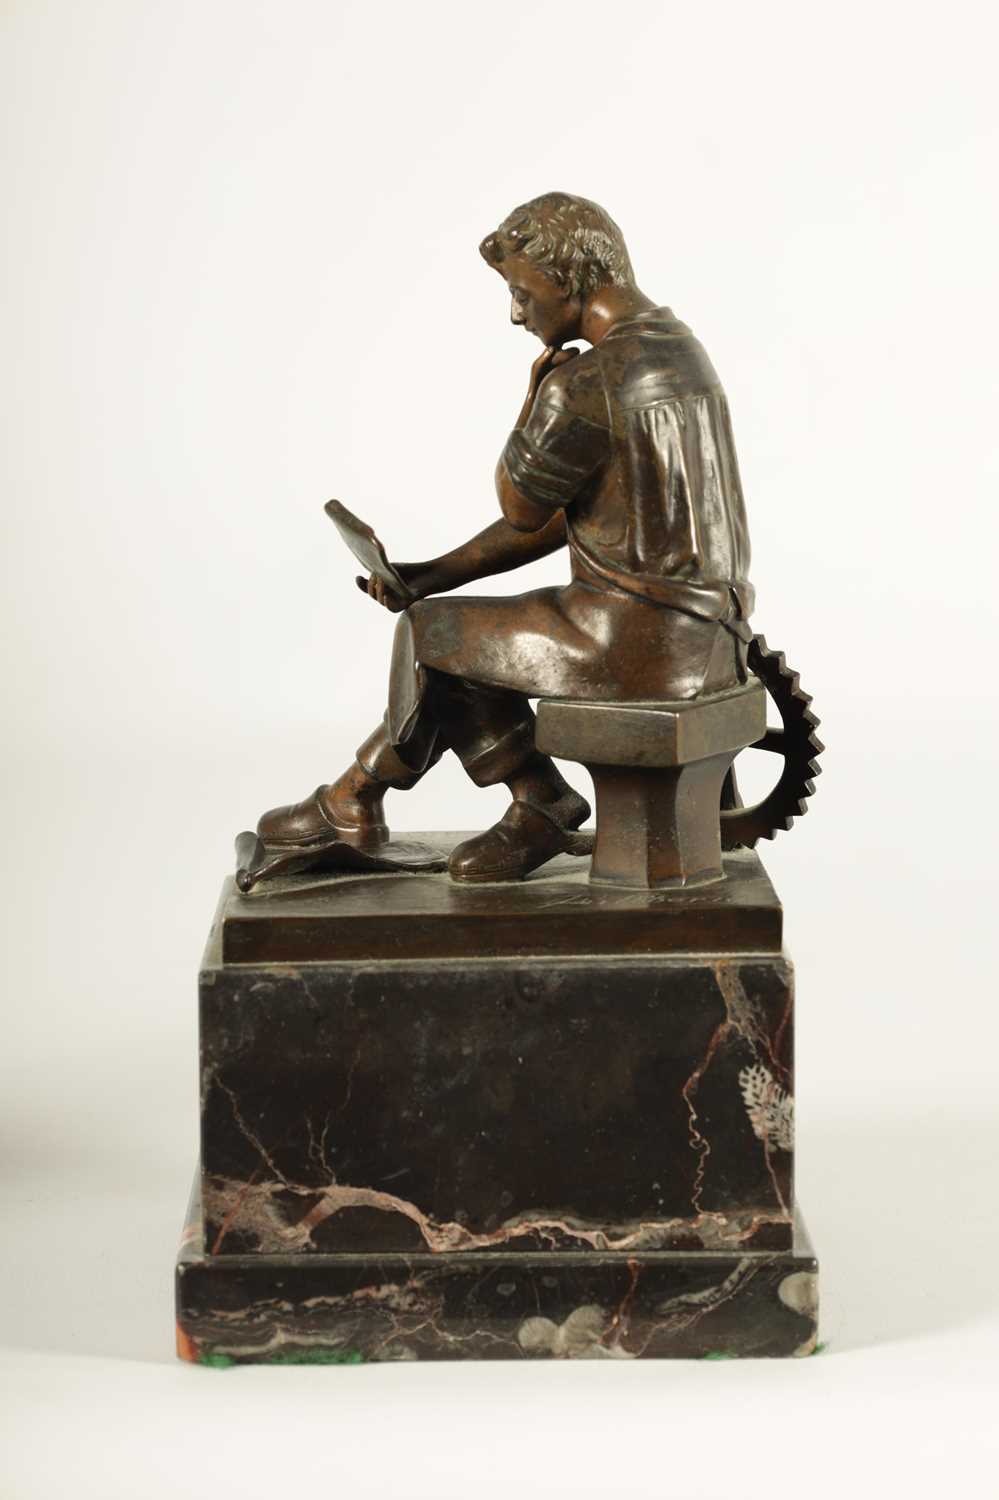 AN EARLY 20TH CENTURY FIGURAL BRONZE SCULPTURE OF AN INDUSTRIALIST - Image 10 of 11